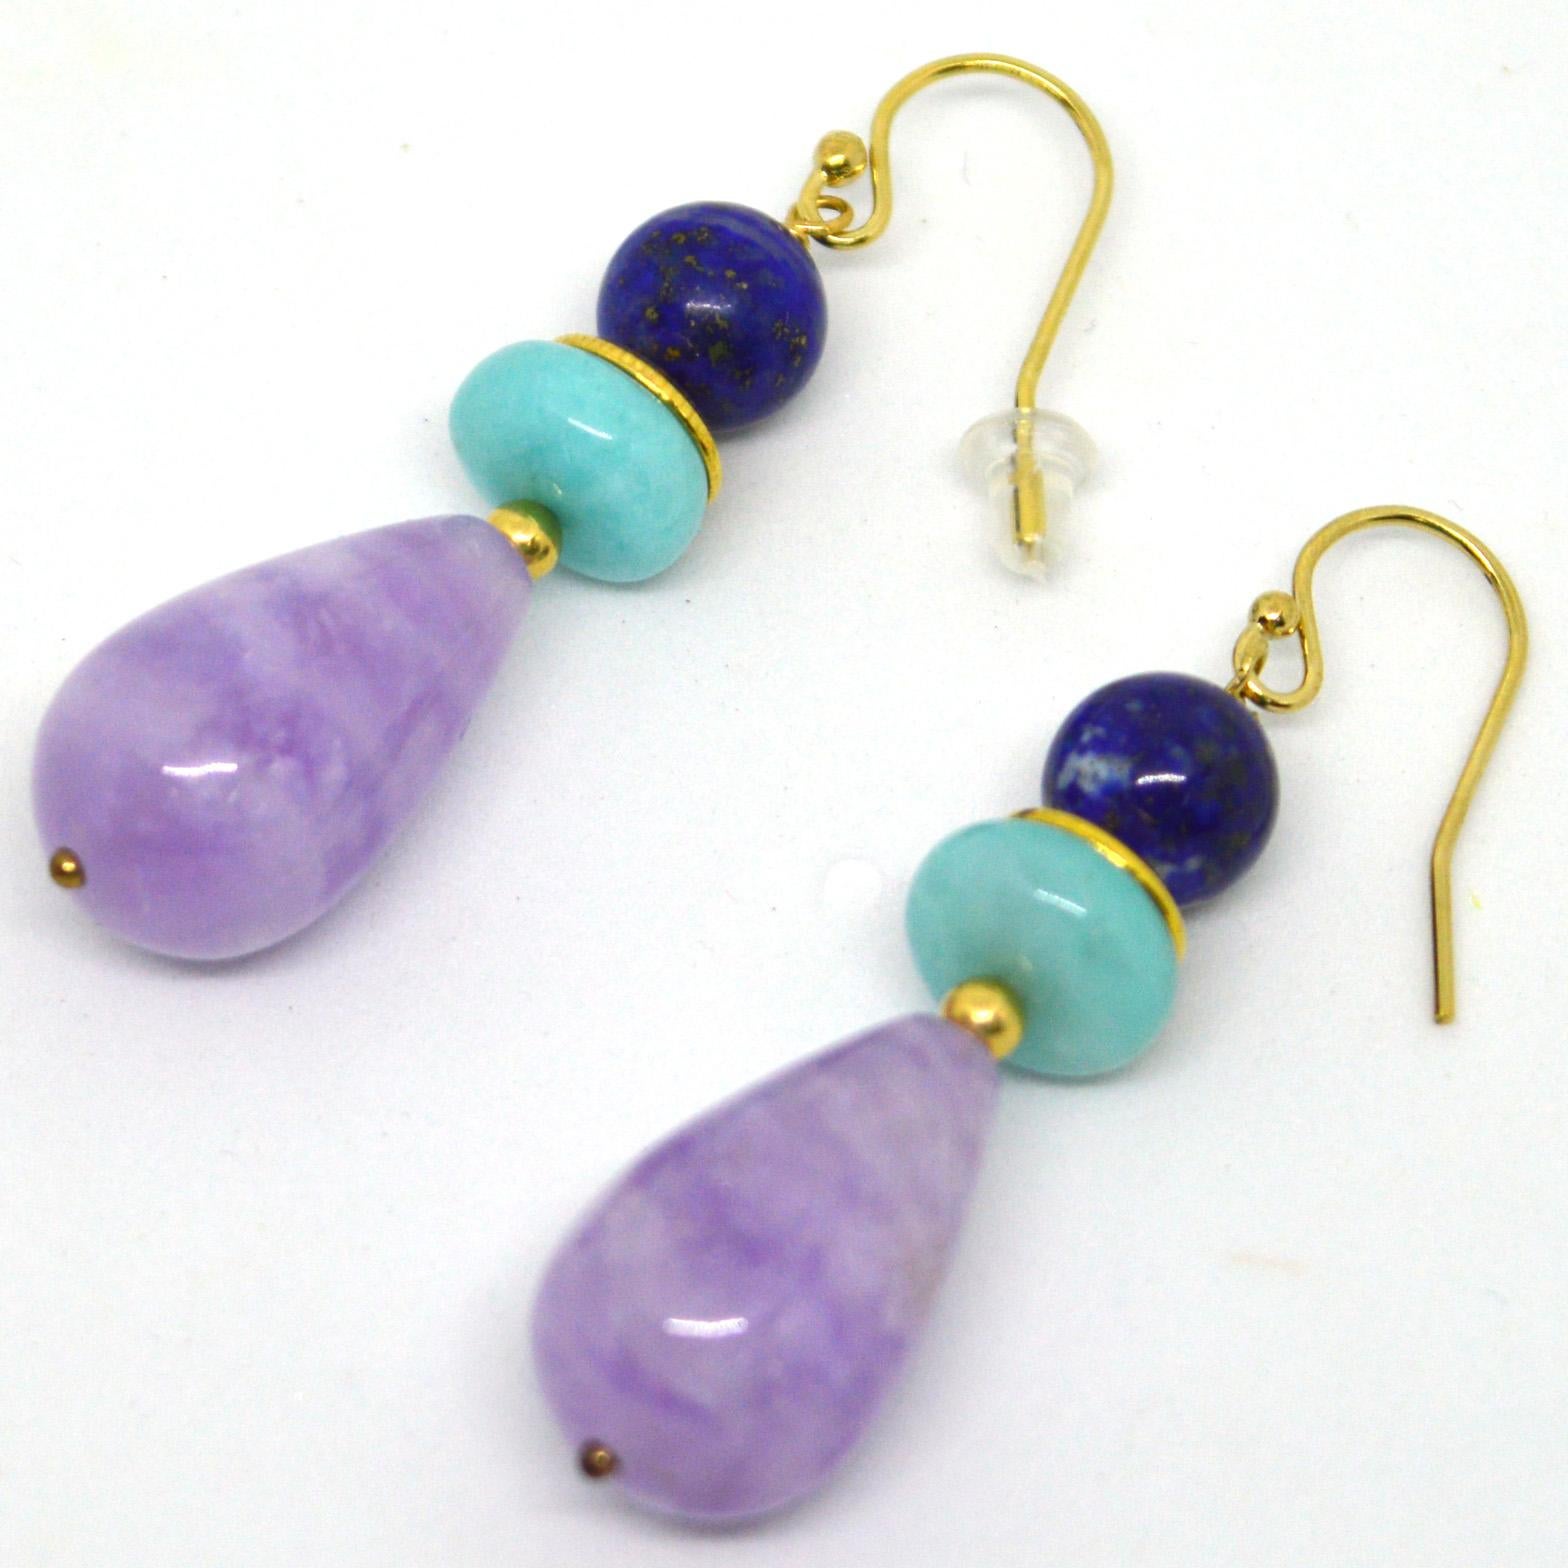 Bright contompary gemstone earrings, craeted from polished teardrops of Cape Amethyst 12x20mm, with natural Afghan Lapis Lazuli 8mm and polished Peruvian Amazonite 10x5mm with 14k gold filled headpin, Cap and Sheppard

Total length of earrings is